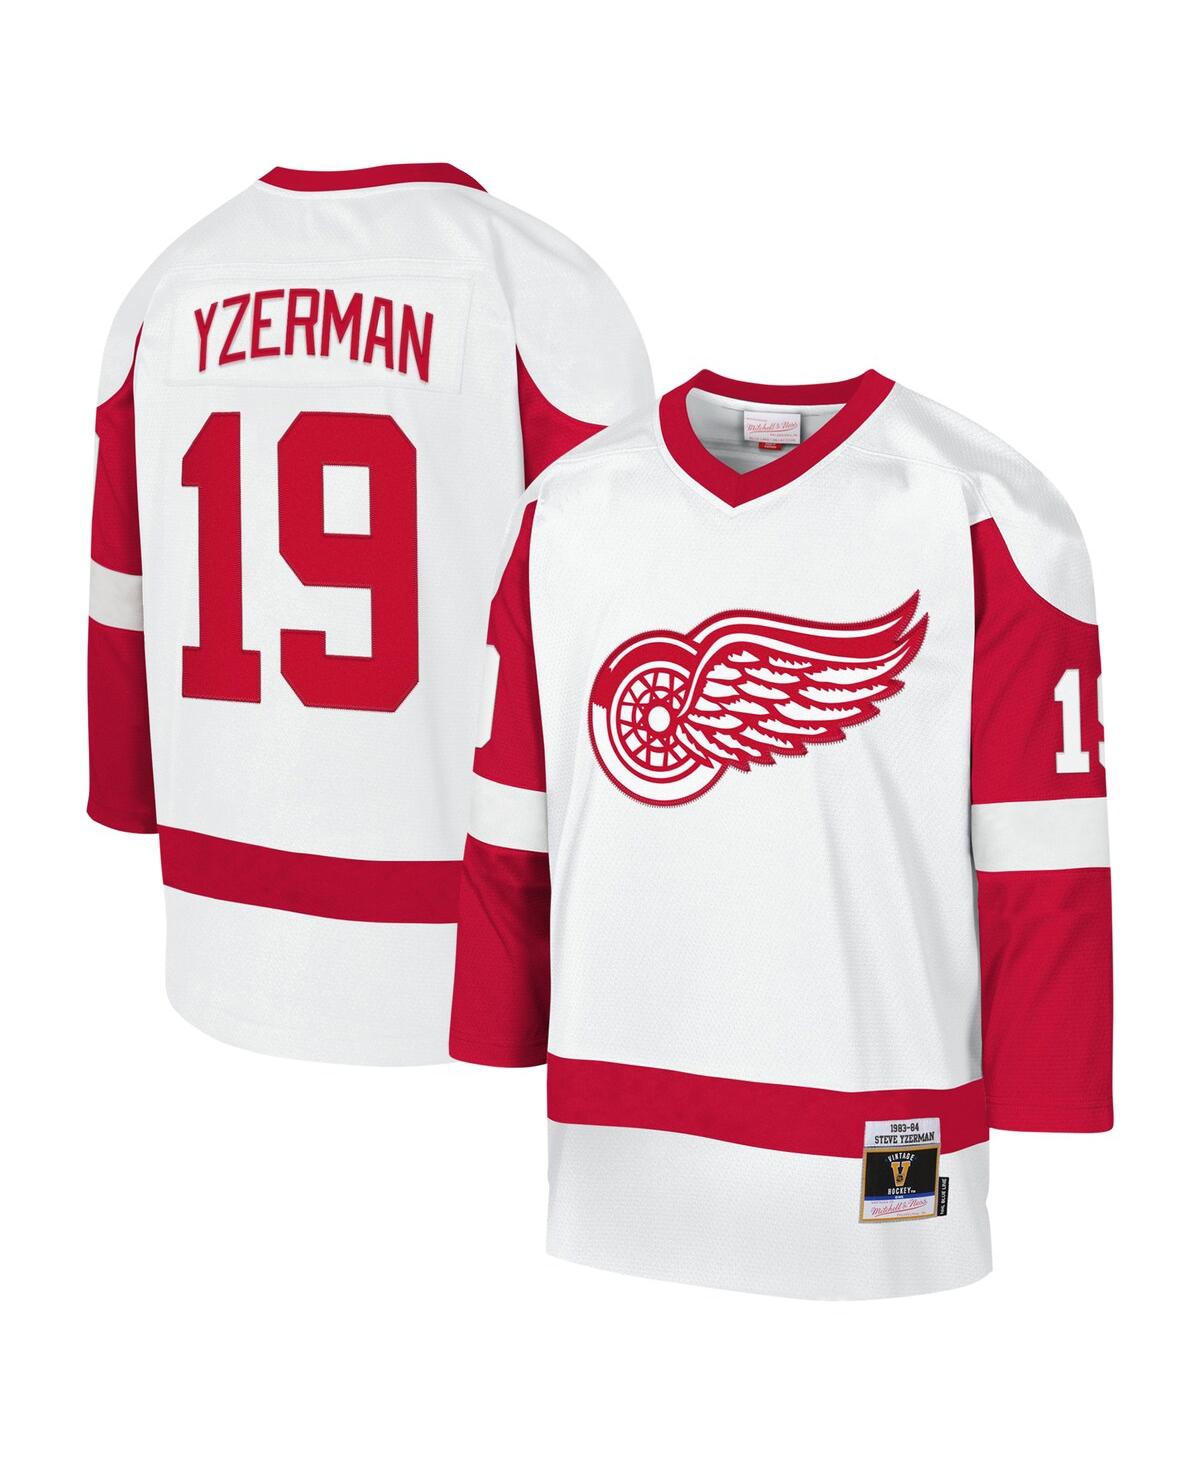 Mitchell Ness Youth Steve Yzerman White Detroit Red Wings 1983-84 Blue Line Player Jersey - White